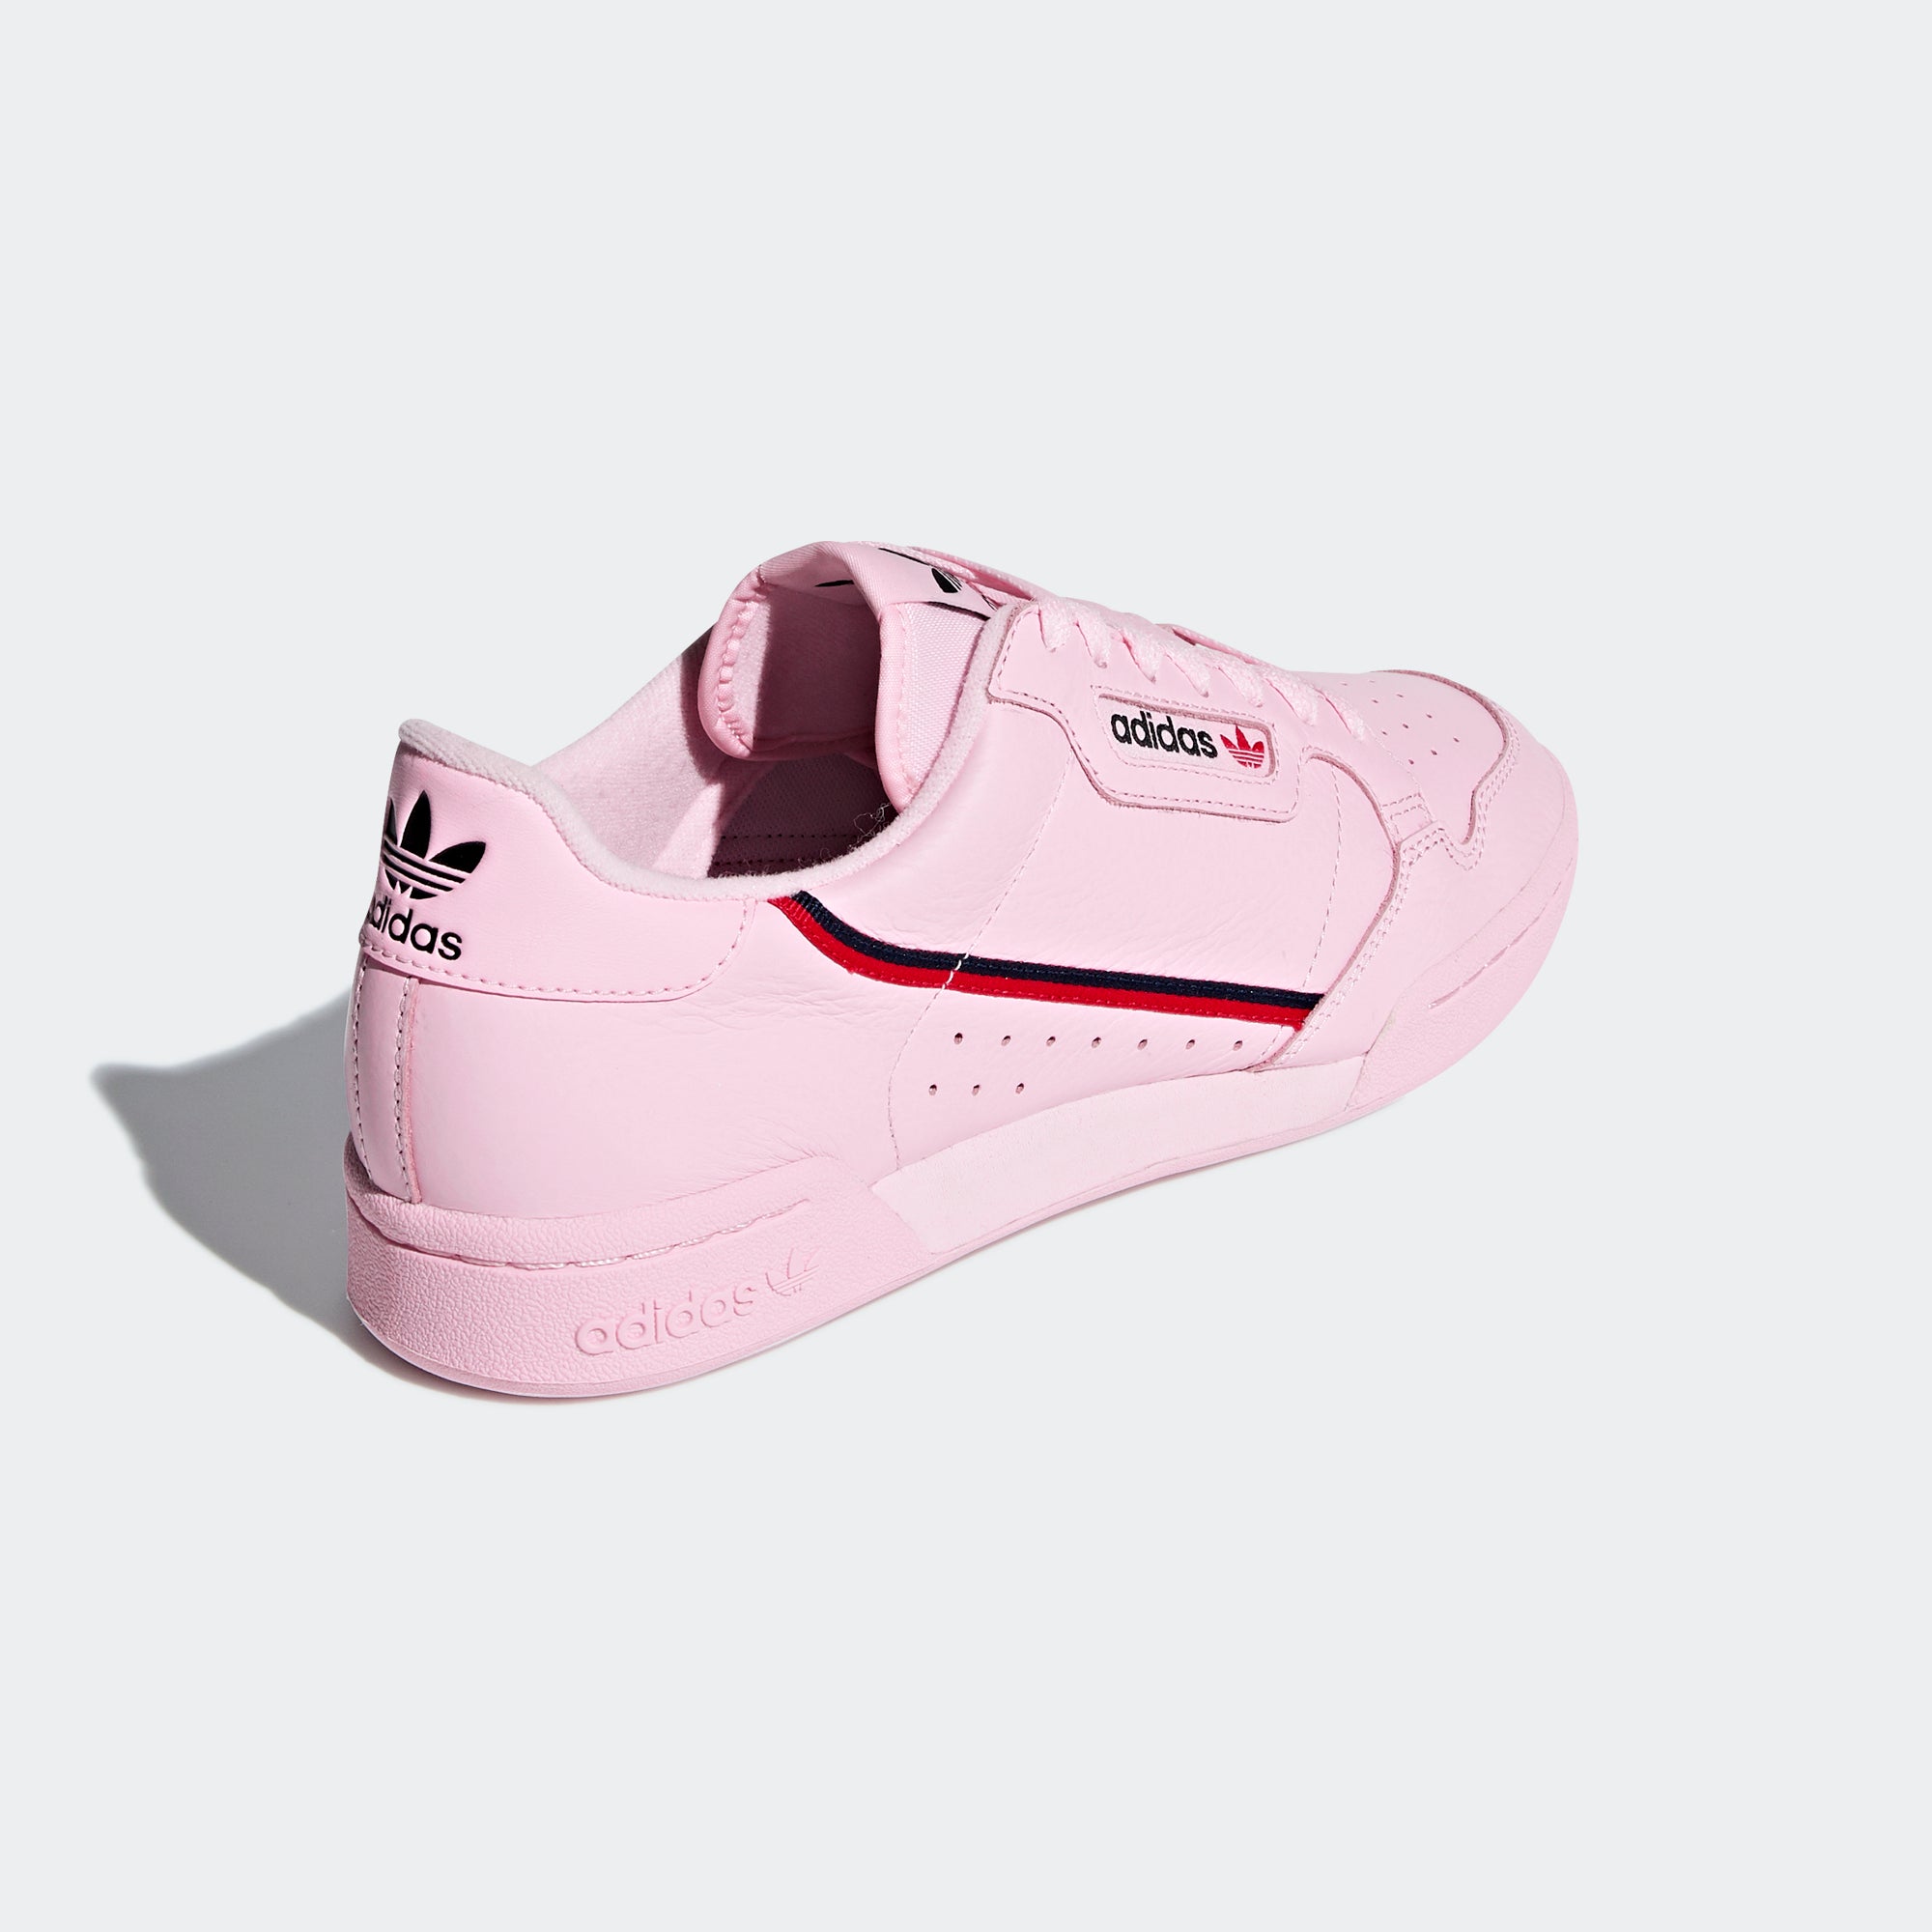 adidas Continental 80 Shoes Clear Pink B41679 | Sports